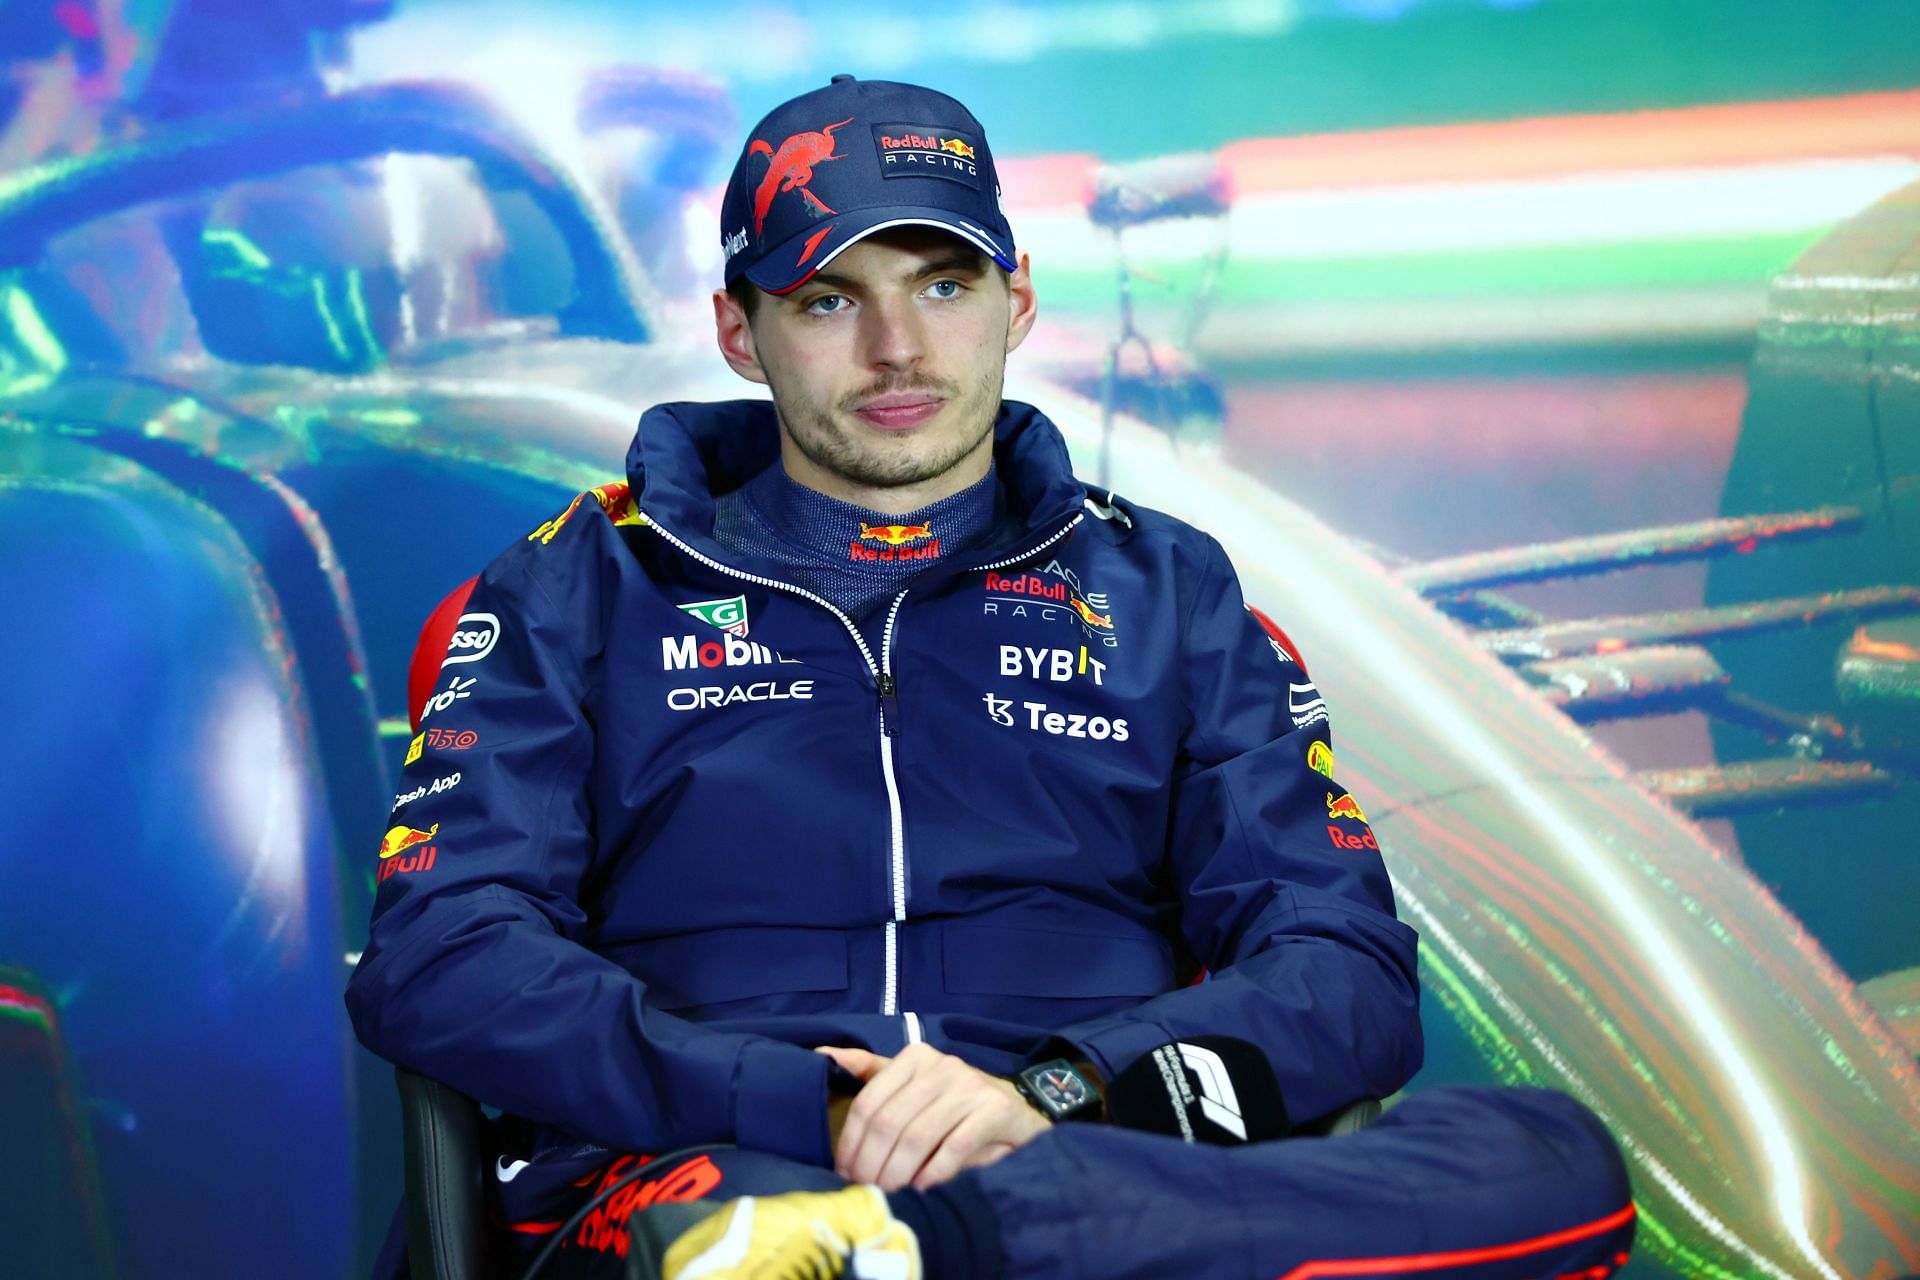 Verstappen&#039;s mature approach has impressed and surprised Red Bull as well